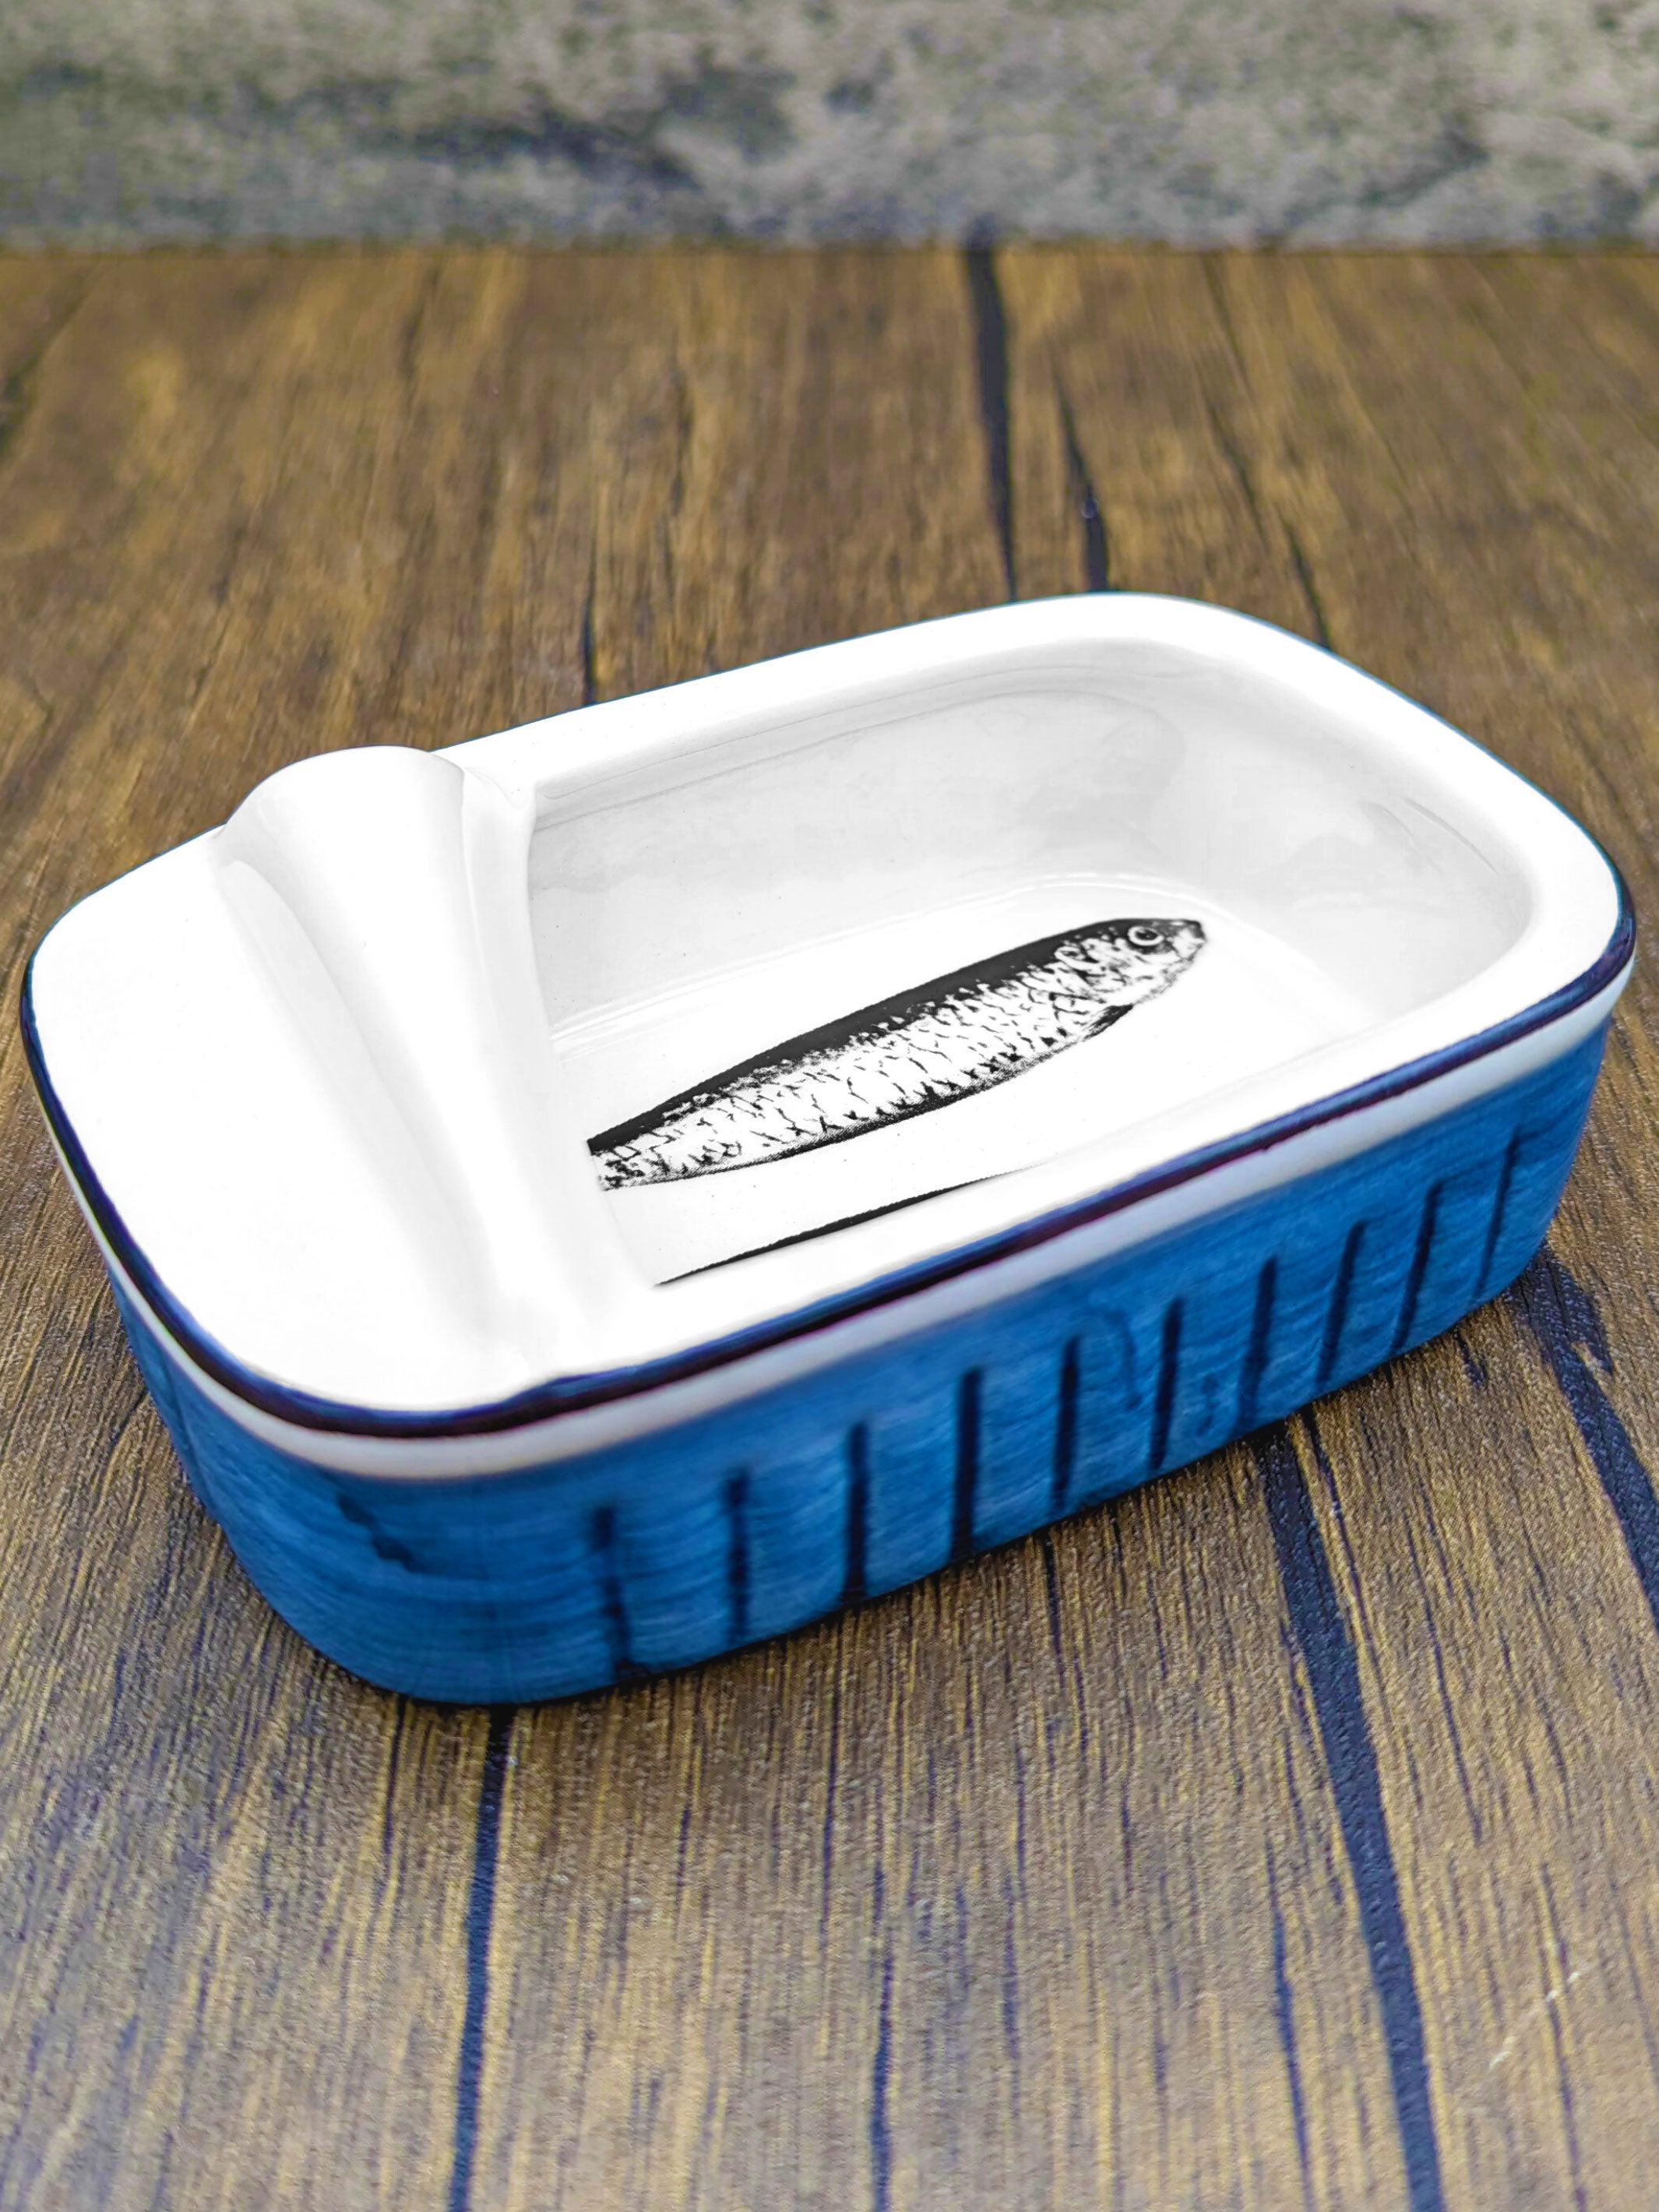 Portuguese Pottery Ceramic Canned Sardines Small Dipping Bowls – Set of 3